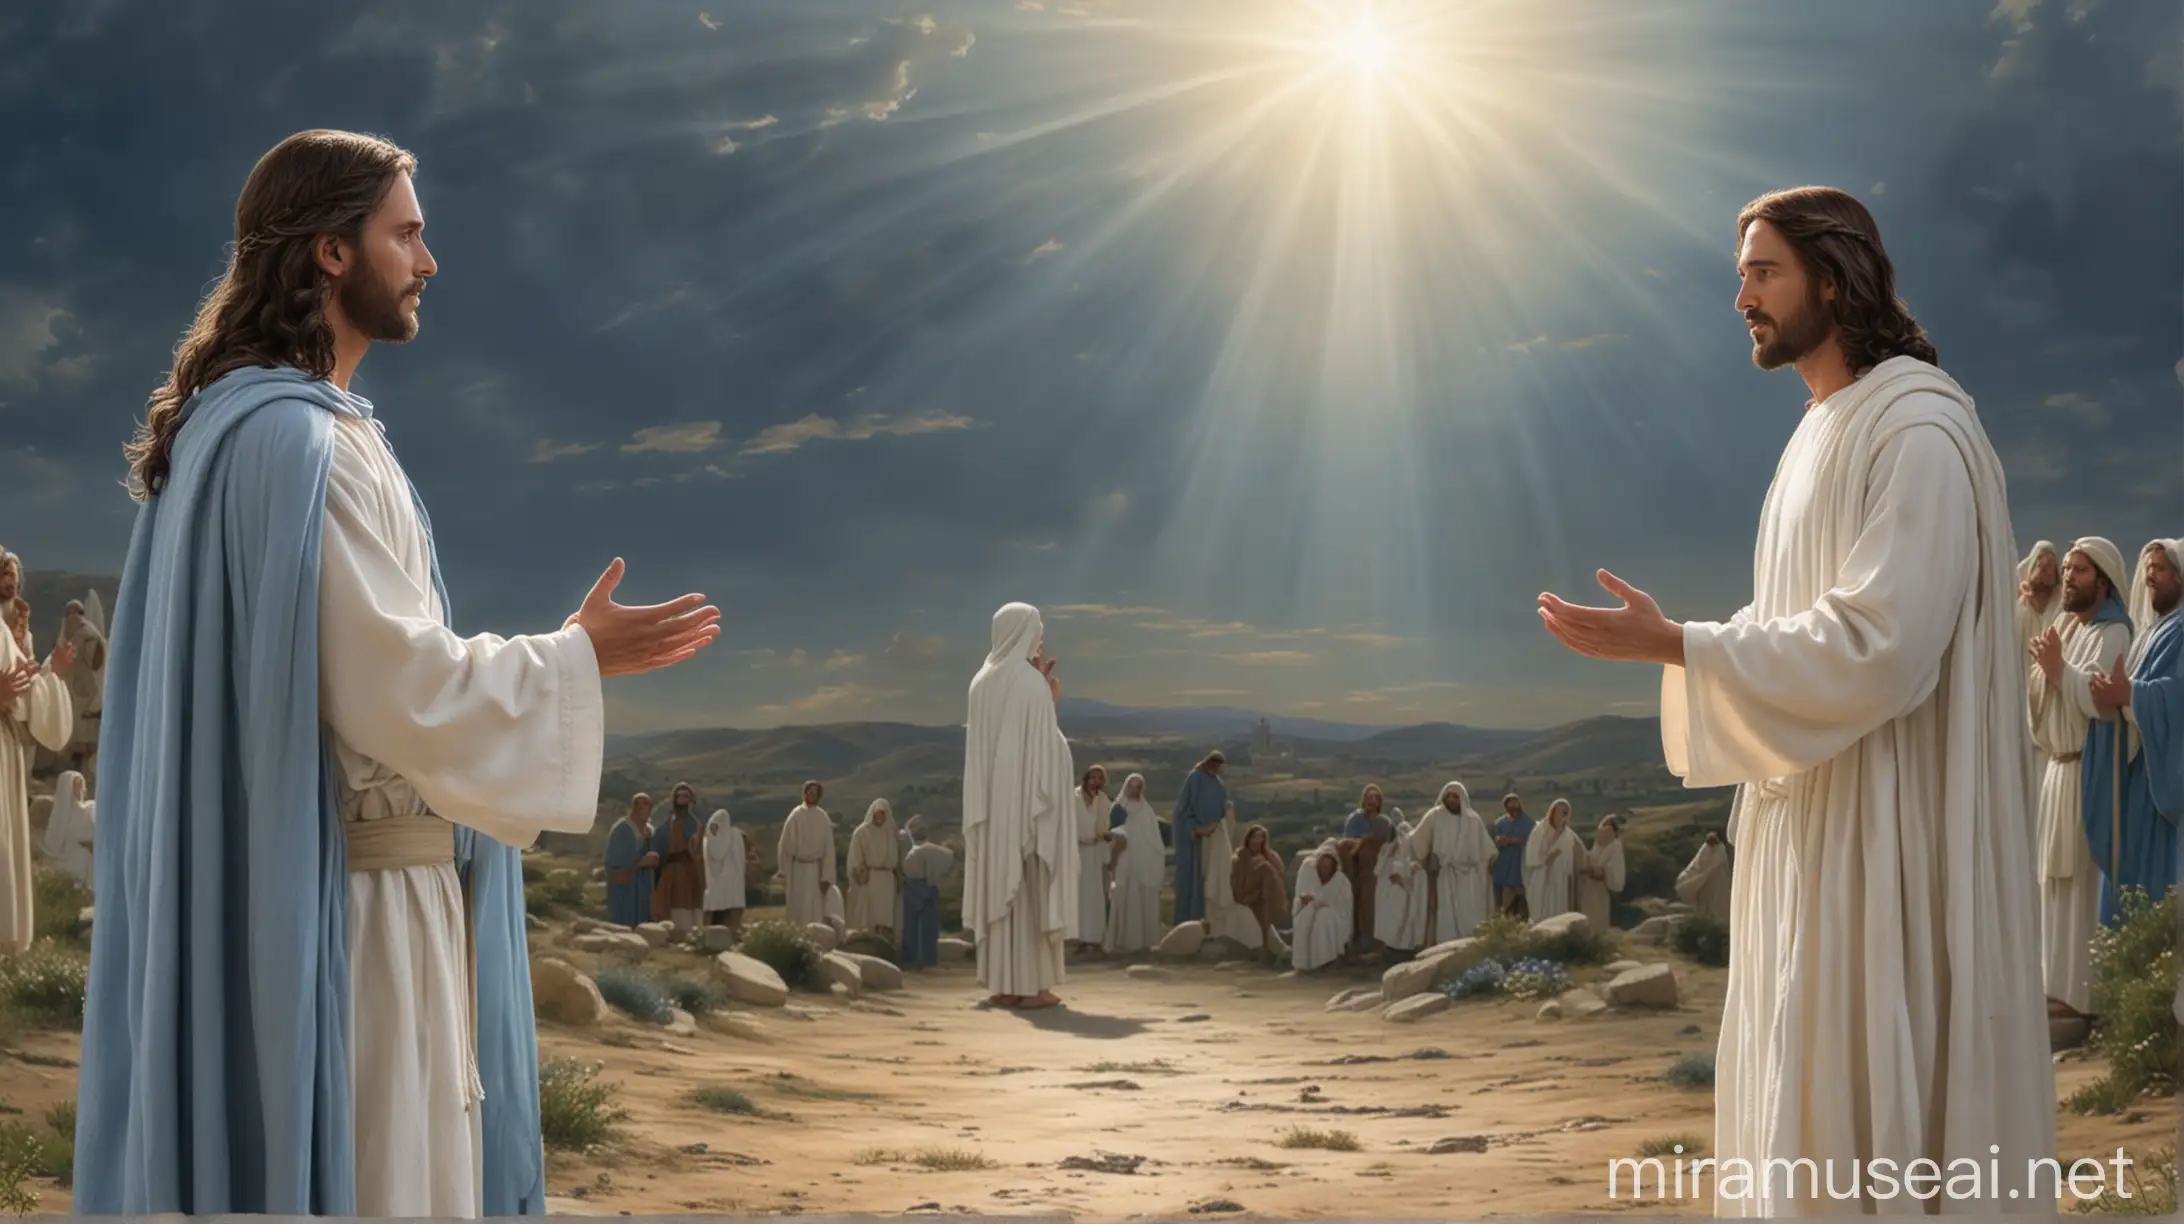 Jesus dressed in white, looking from a distance with love at Peter who is dressed in blue, about to ask him something, background is panoramic